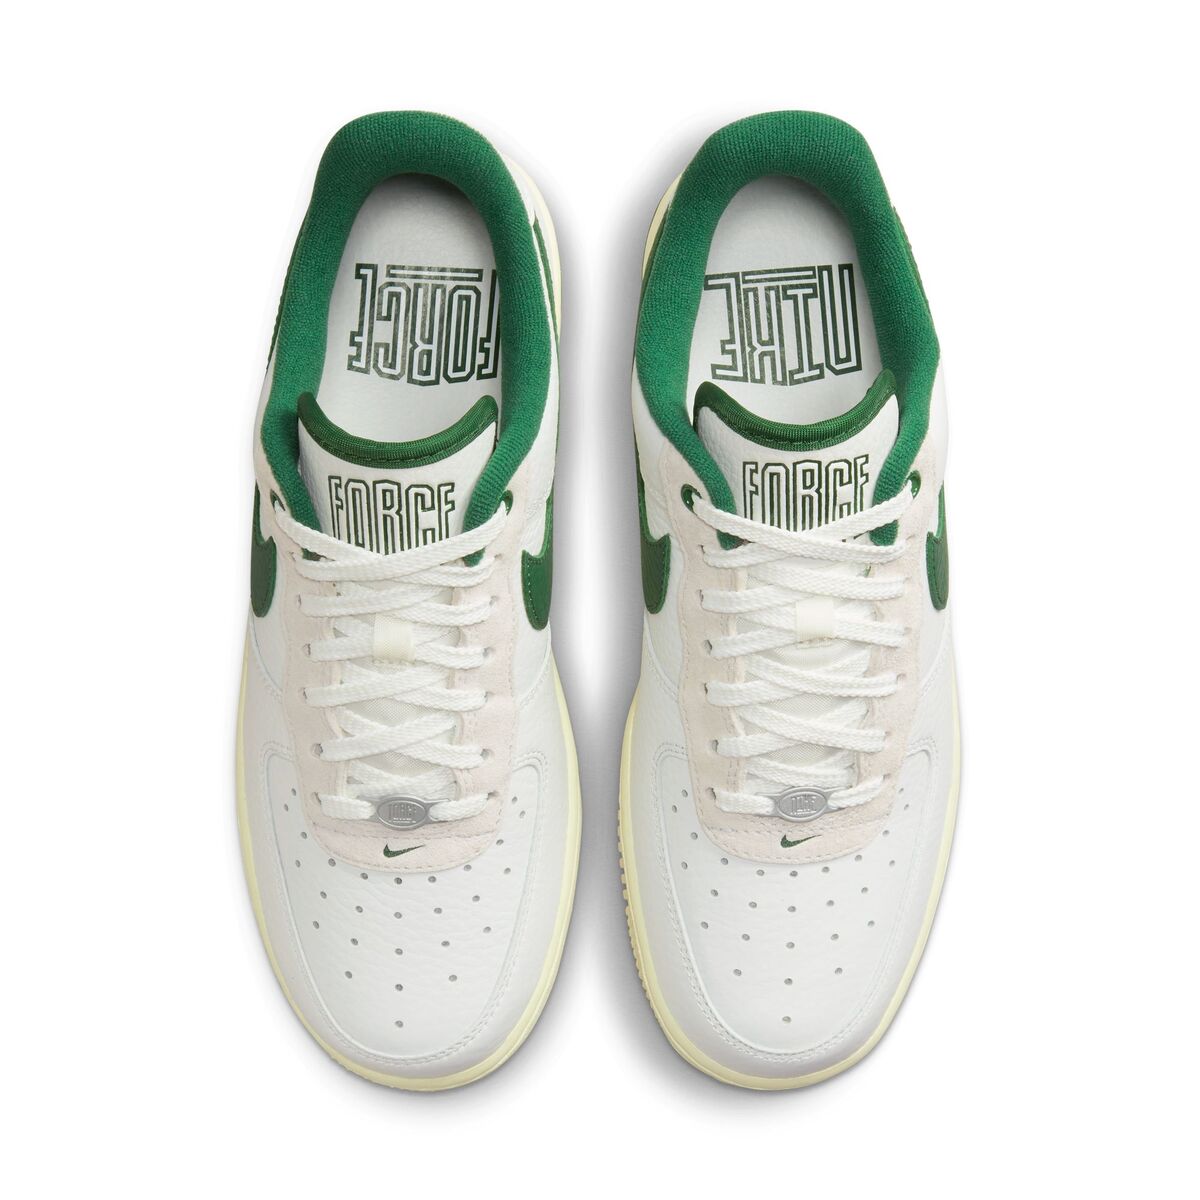 Air Force 1 '07 Summit White and Gorge Green